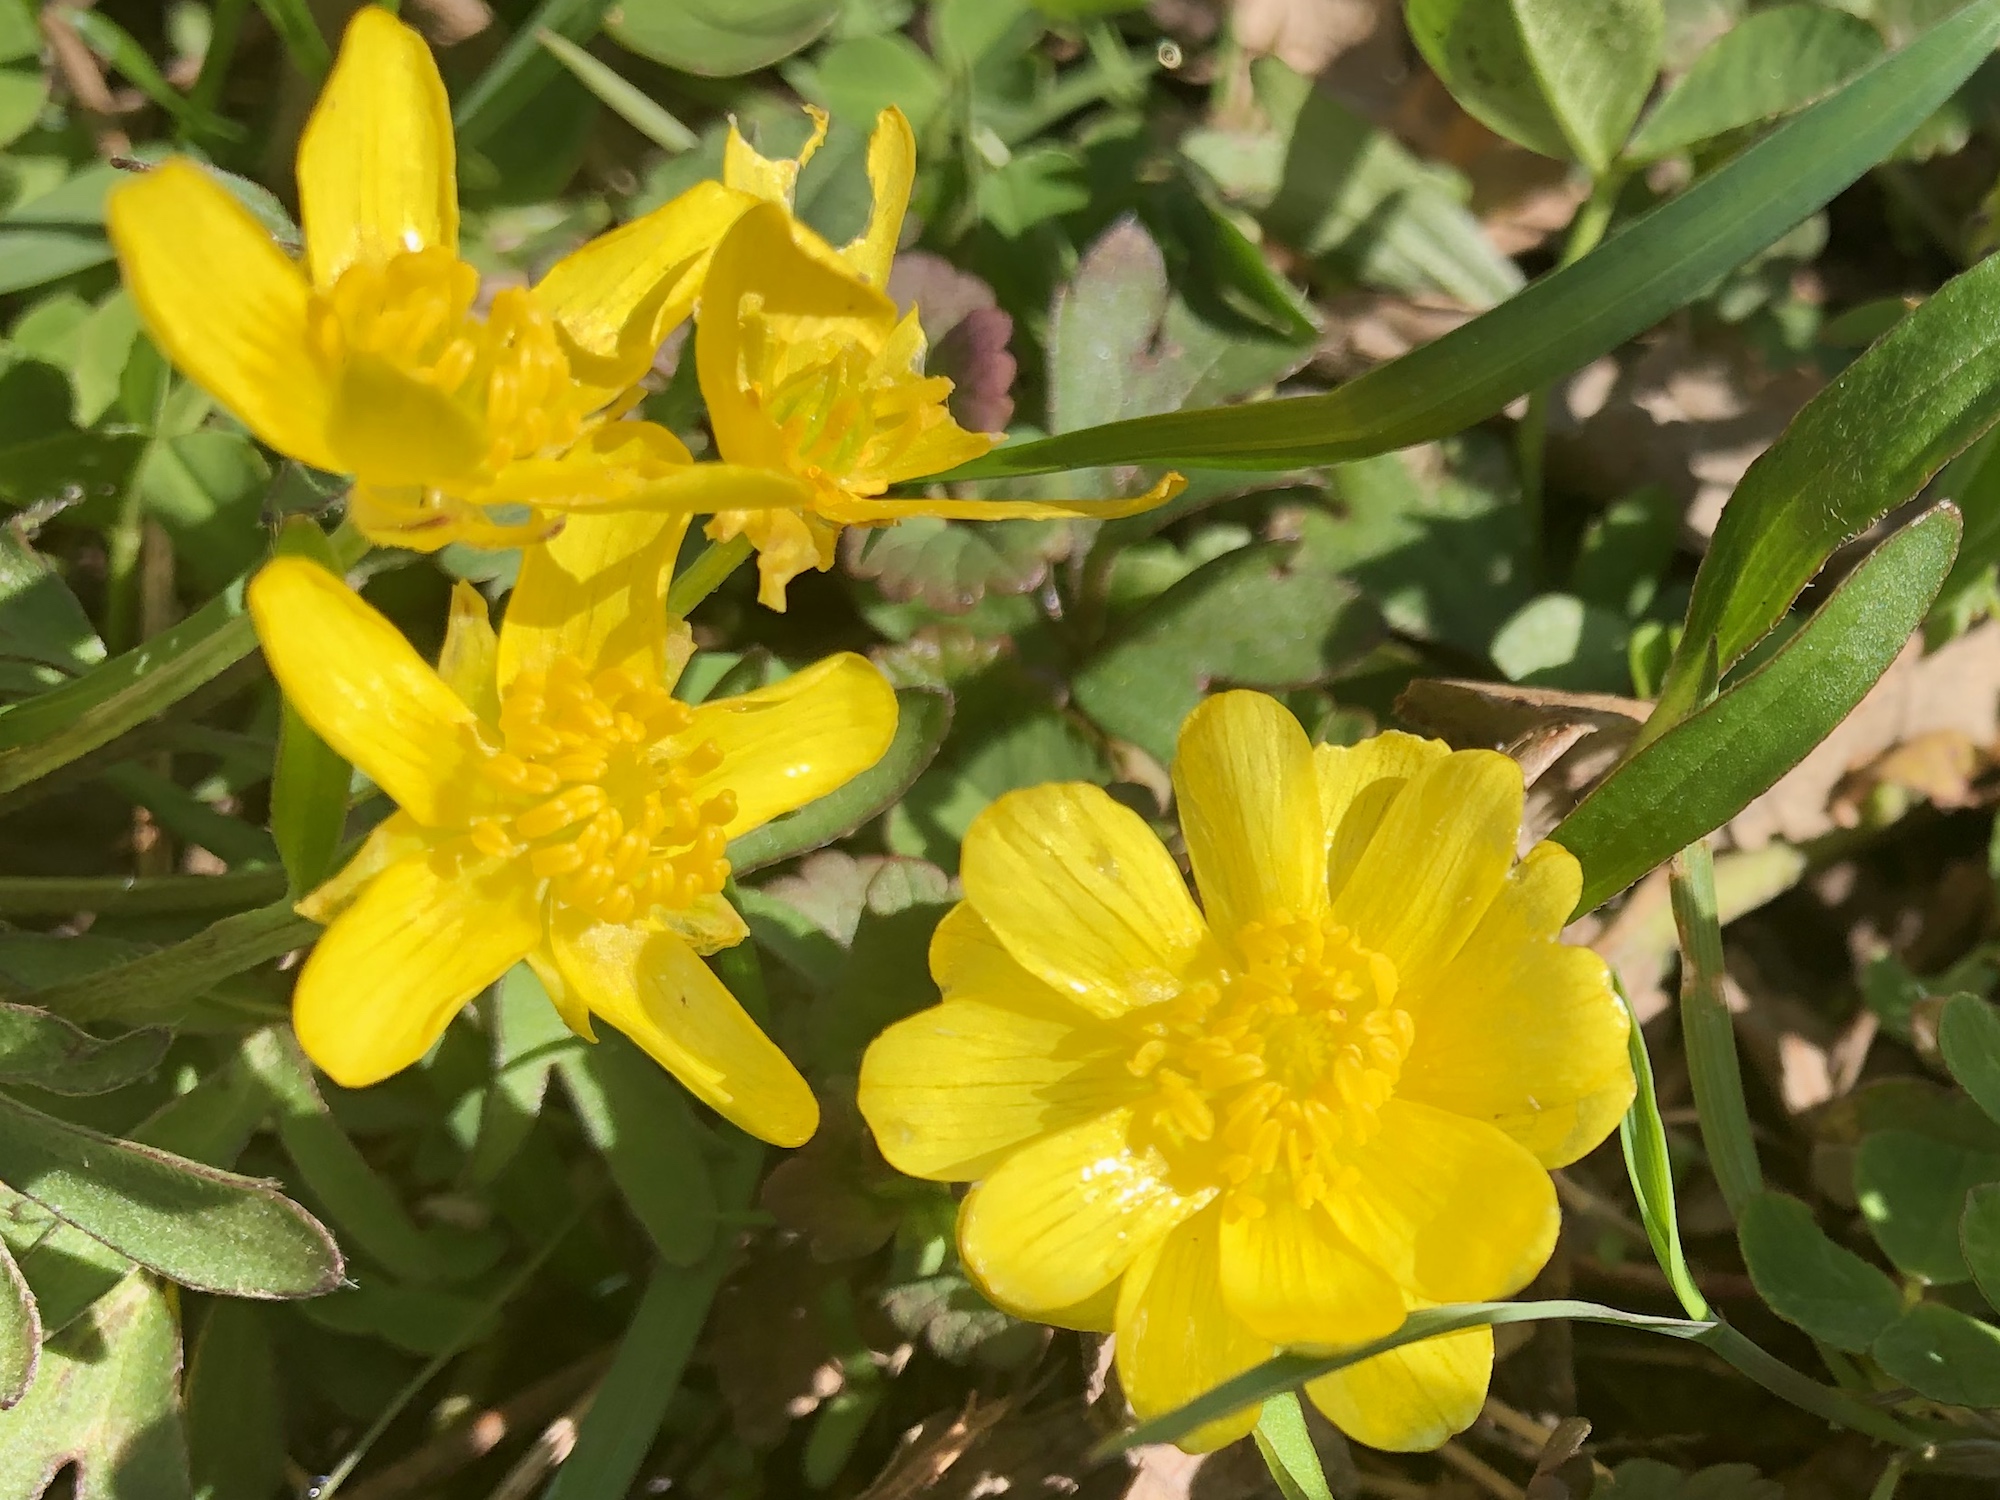 Early Buttercup in Nakoma Park in Madison, Wisconsin on April 30, 2020.